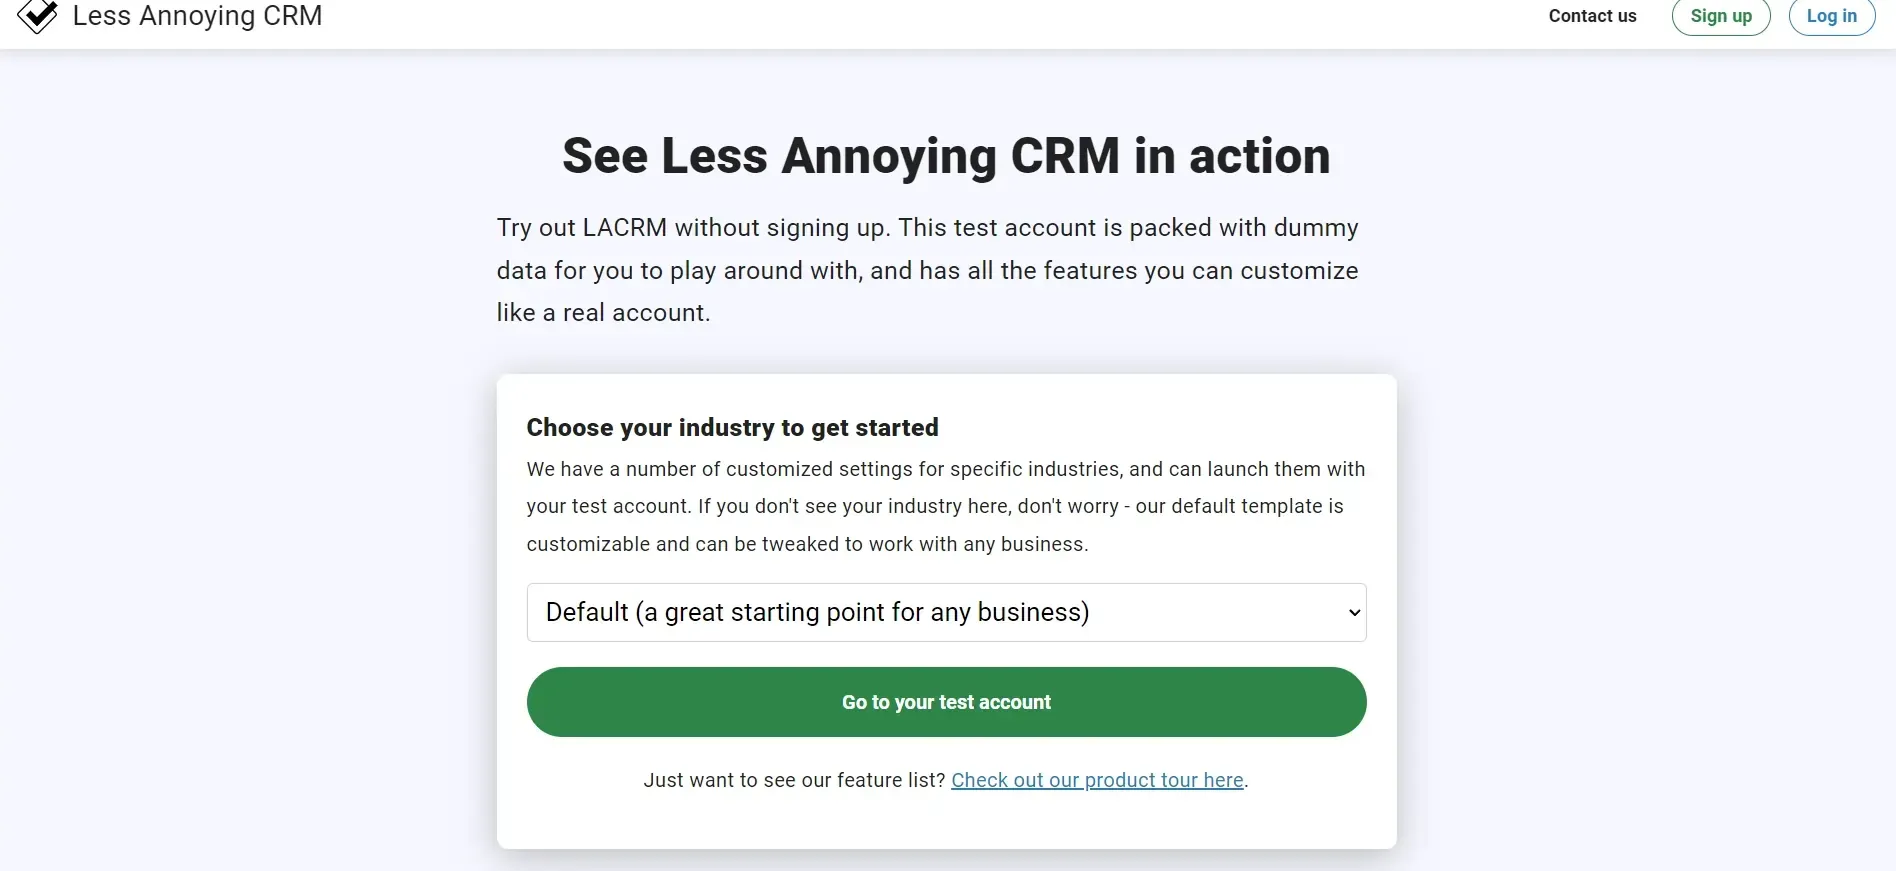 How less annoying CRM works?